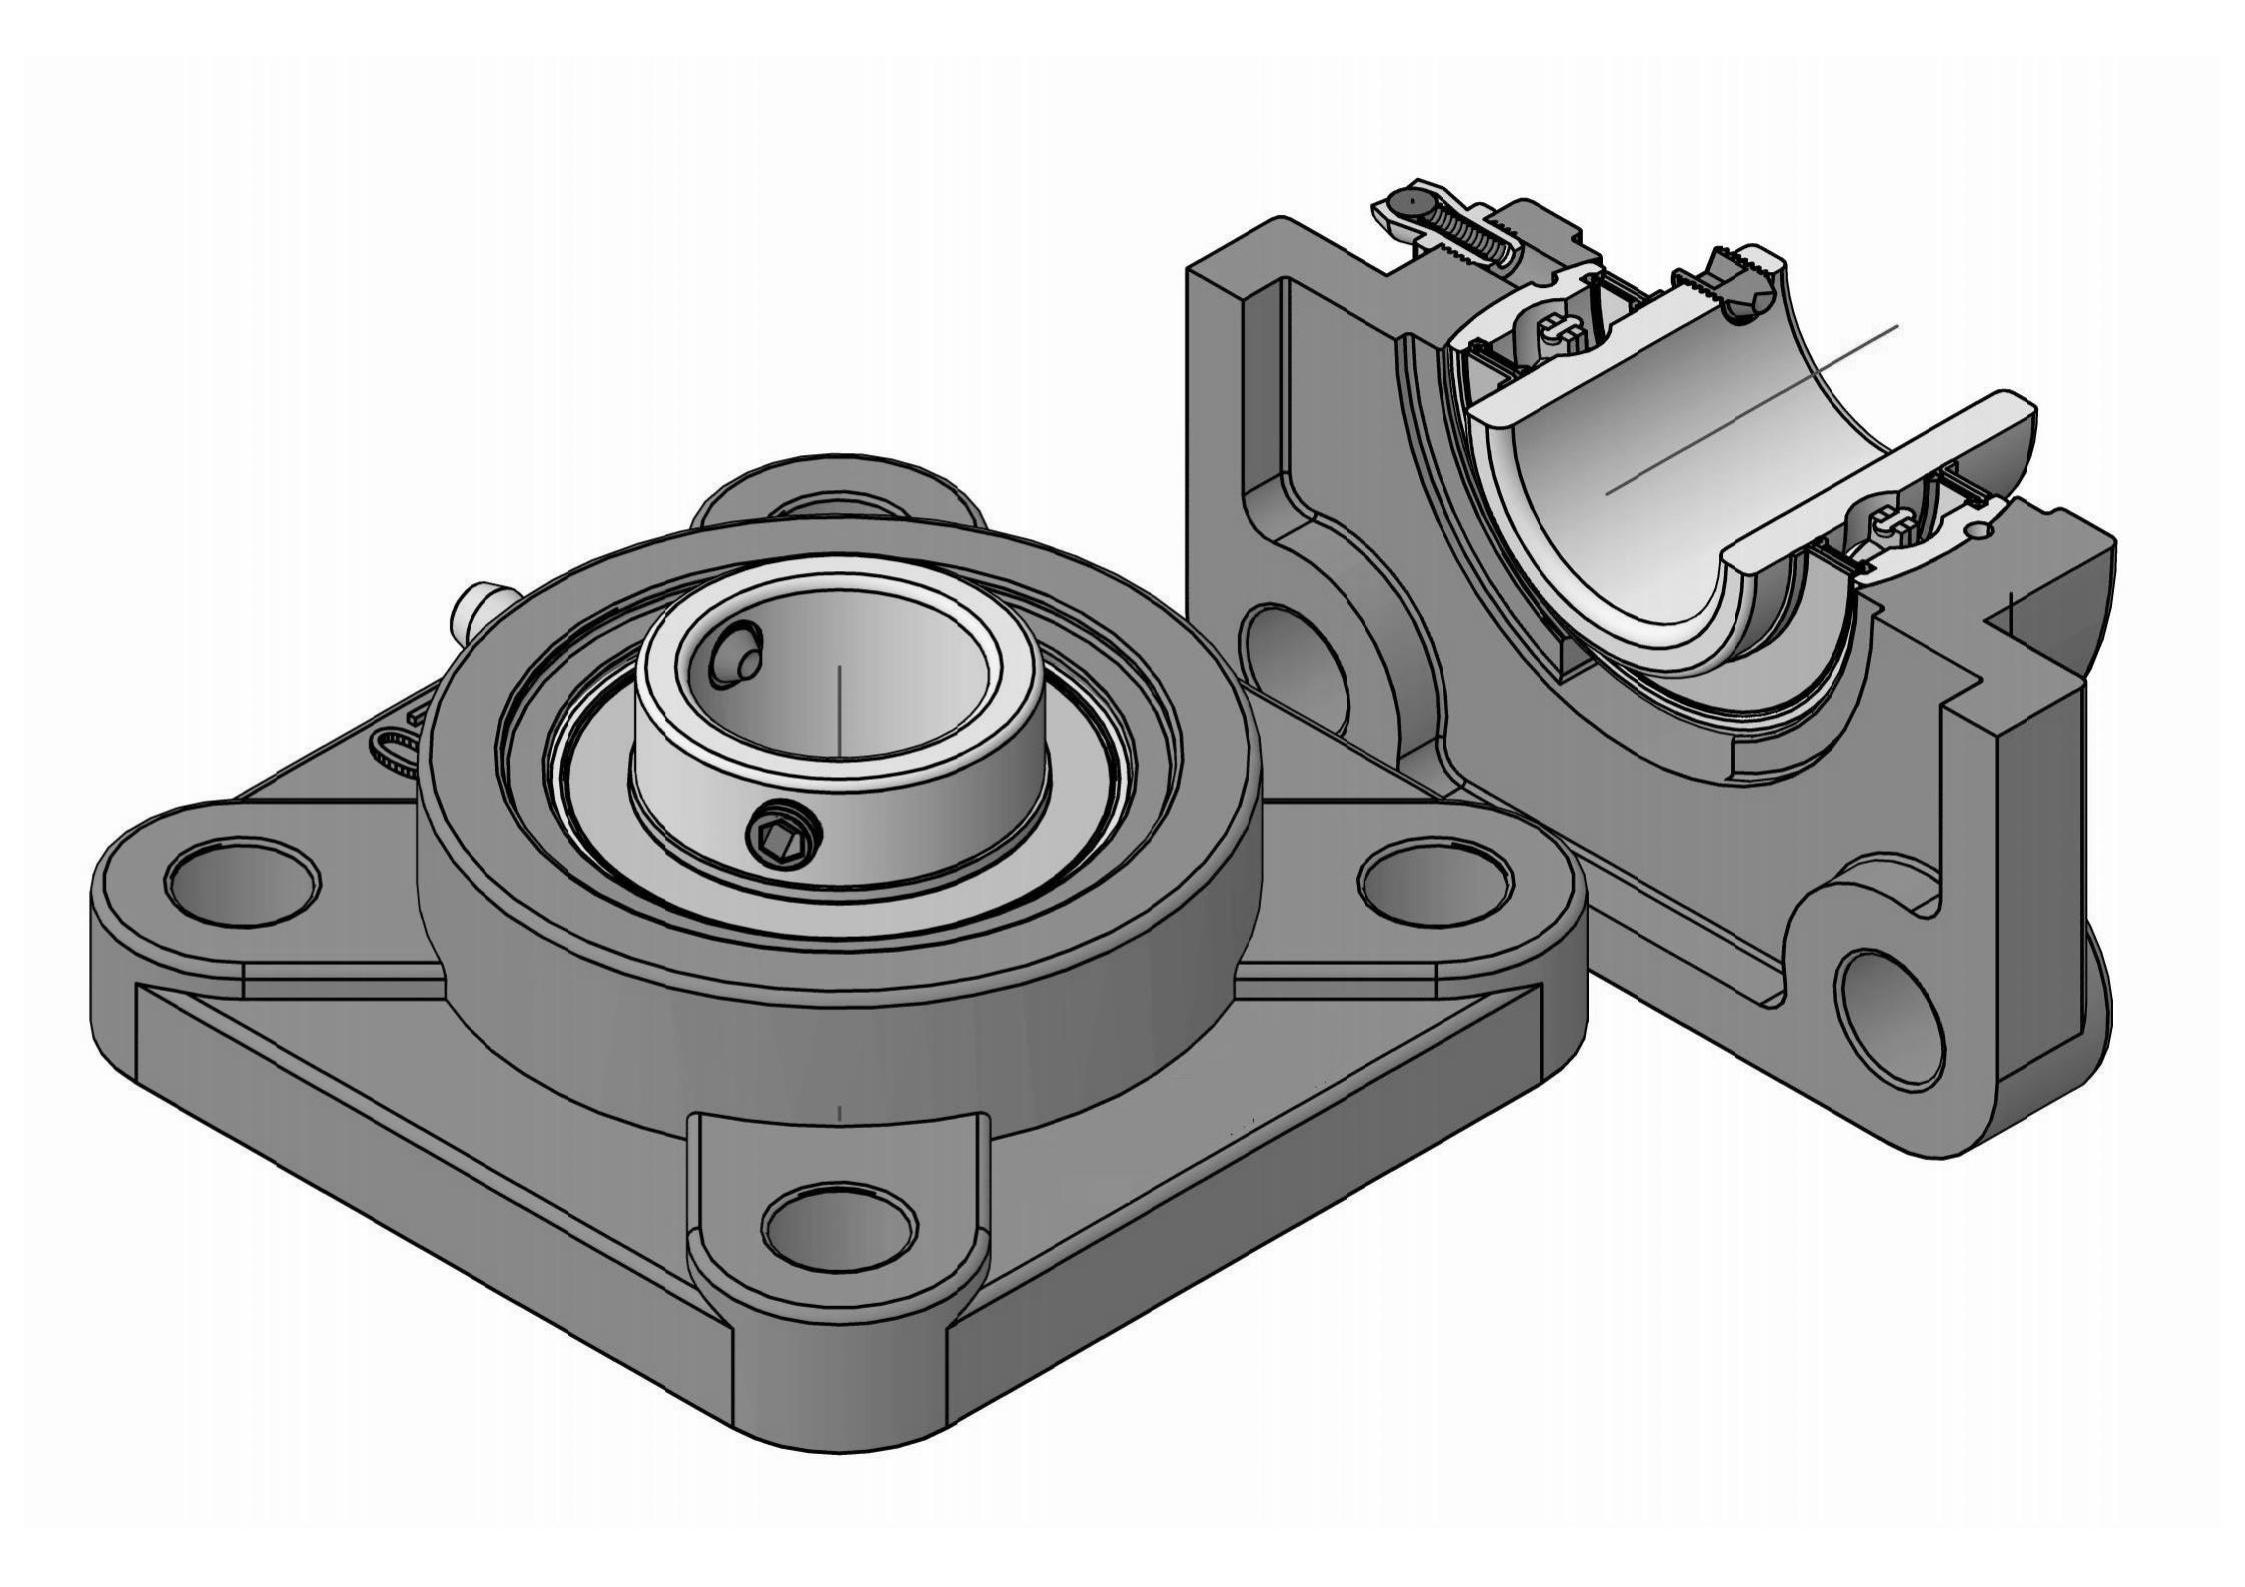 UCFX06-20 four Bolt Square flange bearing units with 1-1/4 inch bore